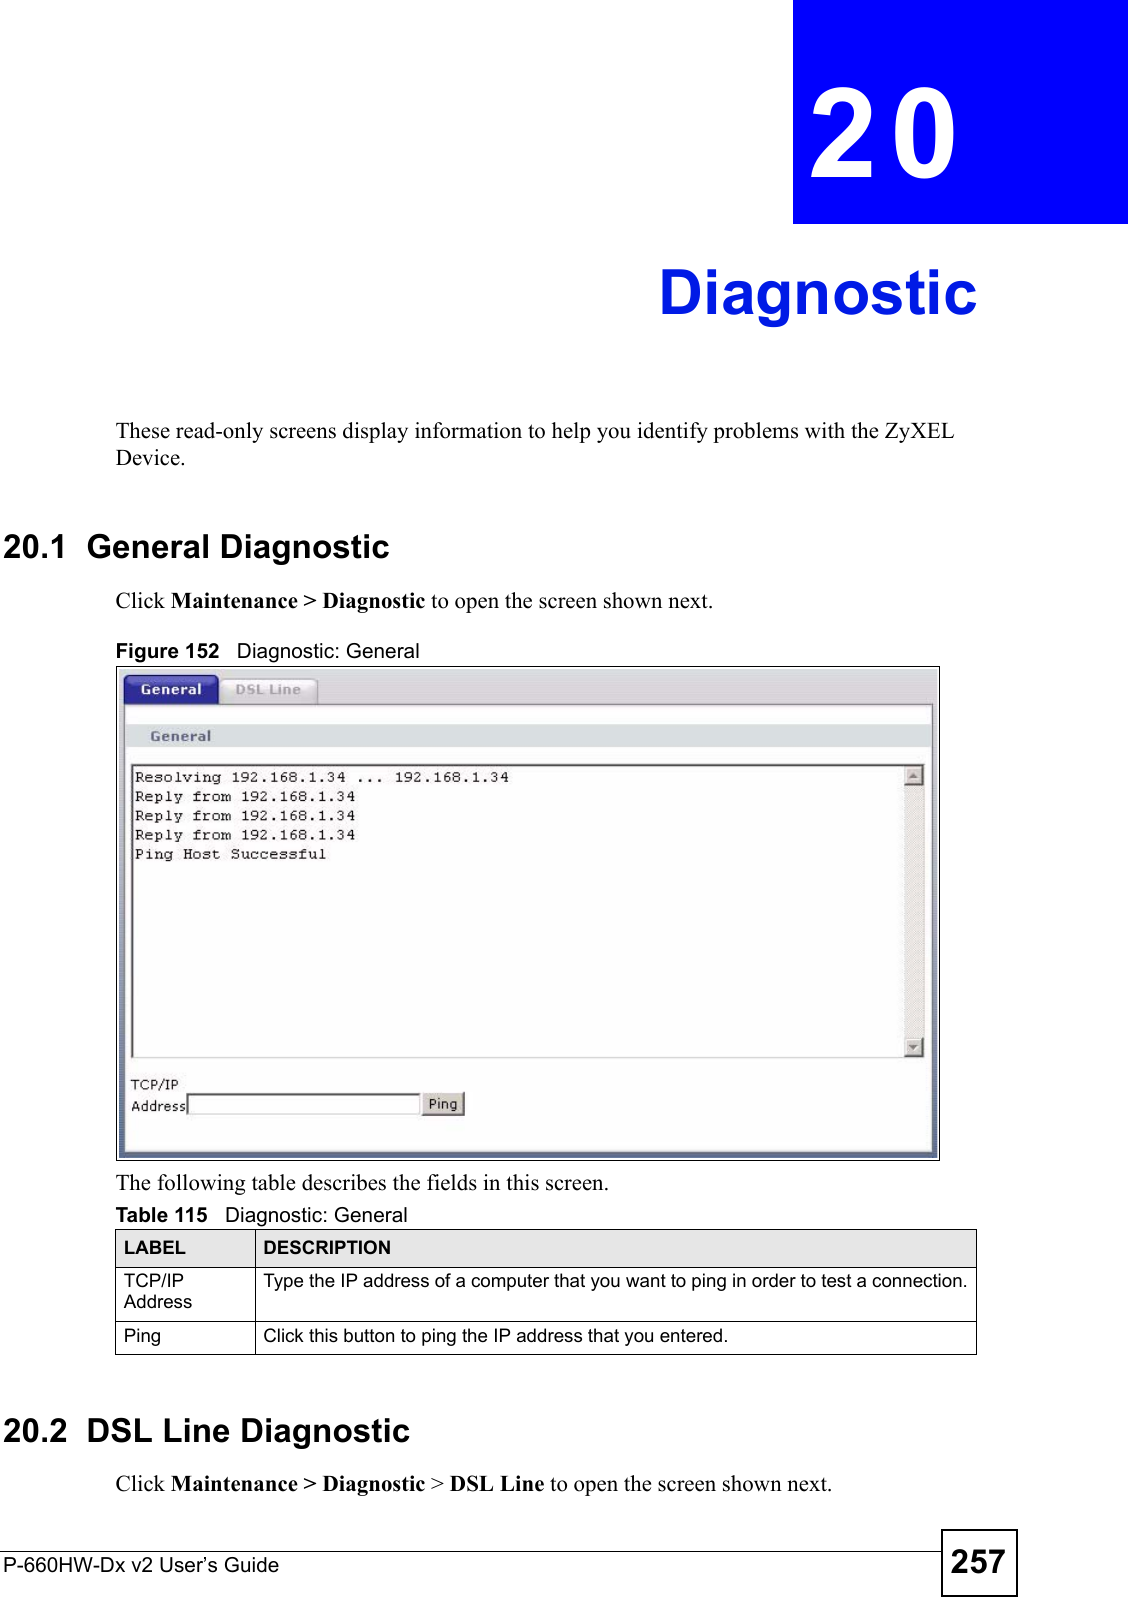 P-660HW-Dx v2 User’s Guide 257CHAPTER  20 DiagnosticThese read-only screens display information to help you identify problems with the ZyXEL Device.20.1  General Diagnostic     Click Maintenance &gt; Diagnostic to open the screen shown next. Figure 152   Diagnostic: GeneralThe following table describes the fields in this screen. 20.2  DSL Line Diagnostic   Click Maintenance &gt; Diagnostic &gt; DSL Line to open the screen shown next.Table 115   Diagnostic: GeneralLABEL DESCRIPTIONTCP/IP AddressType the IP address of a computer that you want to ping in order to test a connection.Ping Click this button to ping the IP address that you entered.